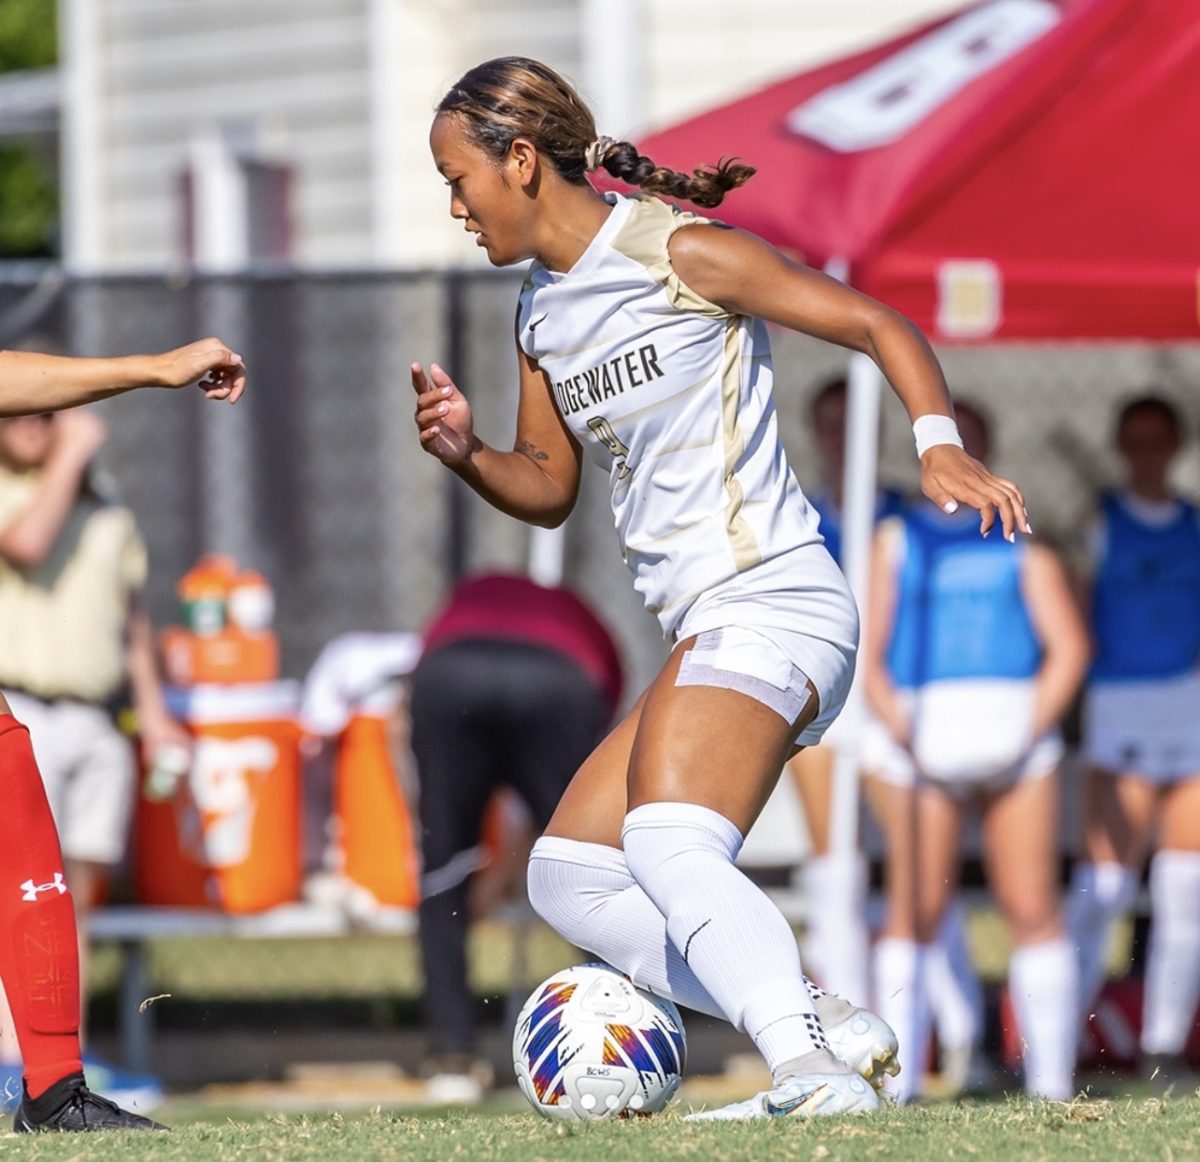 Senior Alicia Keo dribbling in a game this past season. The Eagles finished the year at 12-6-1 and 7-3 in conference.